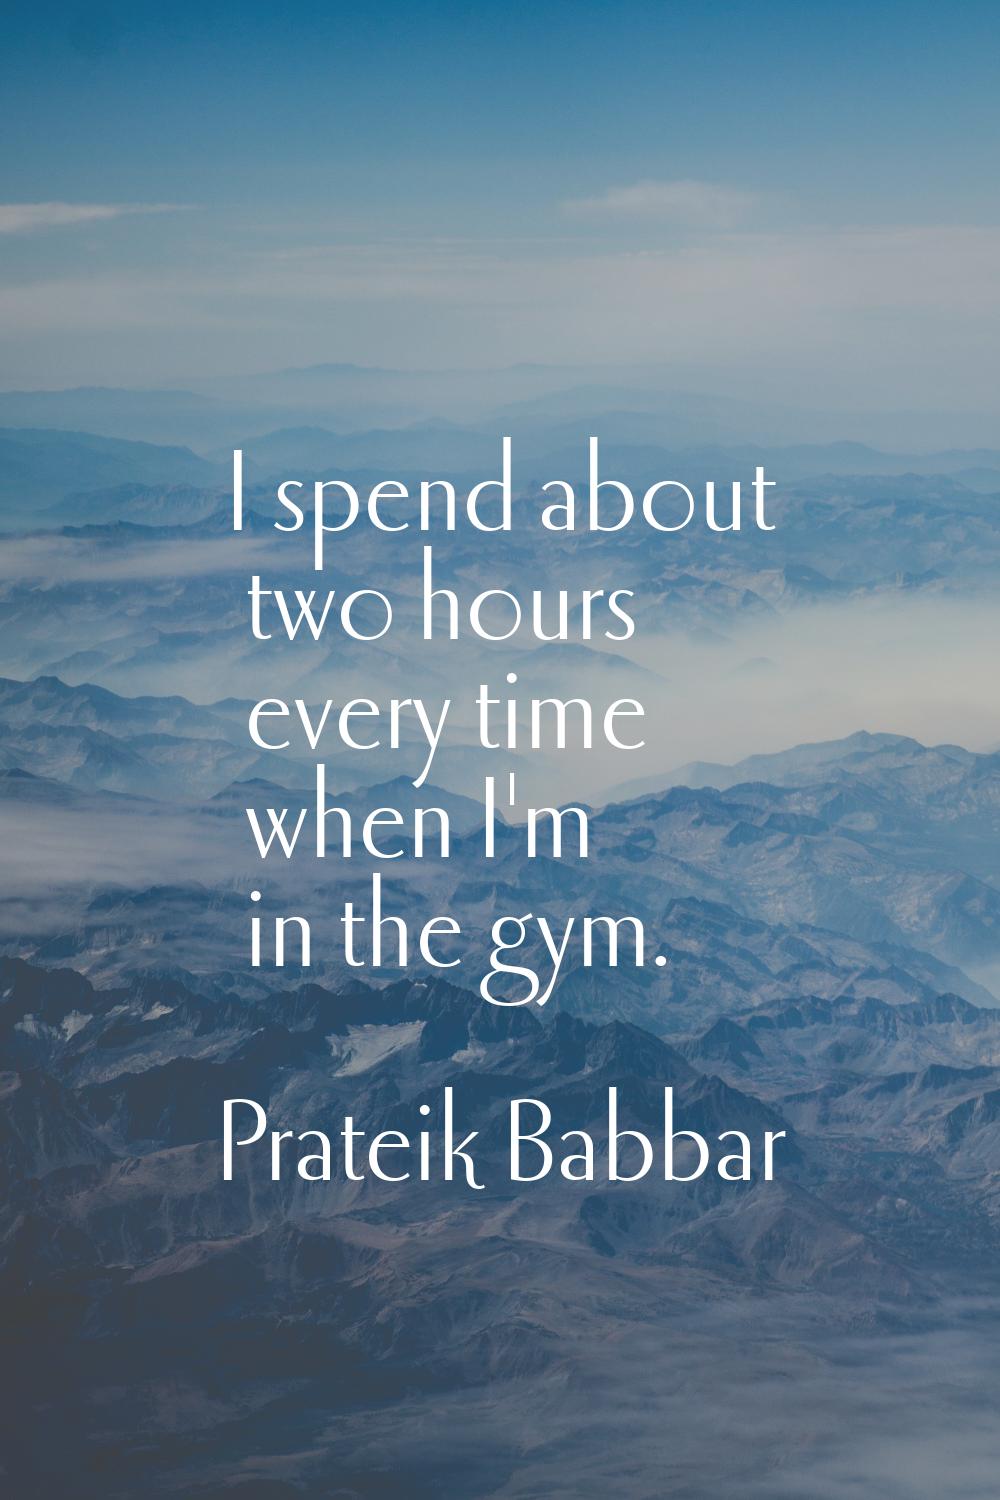 I spend about two hours every time when I'm in the gym.